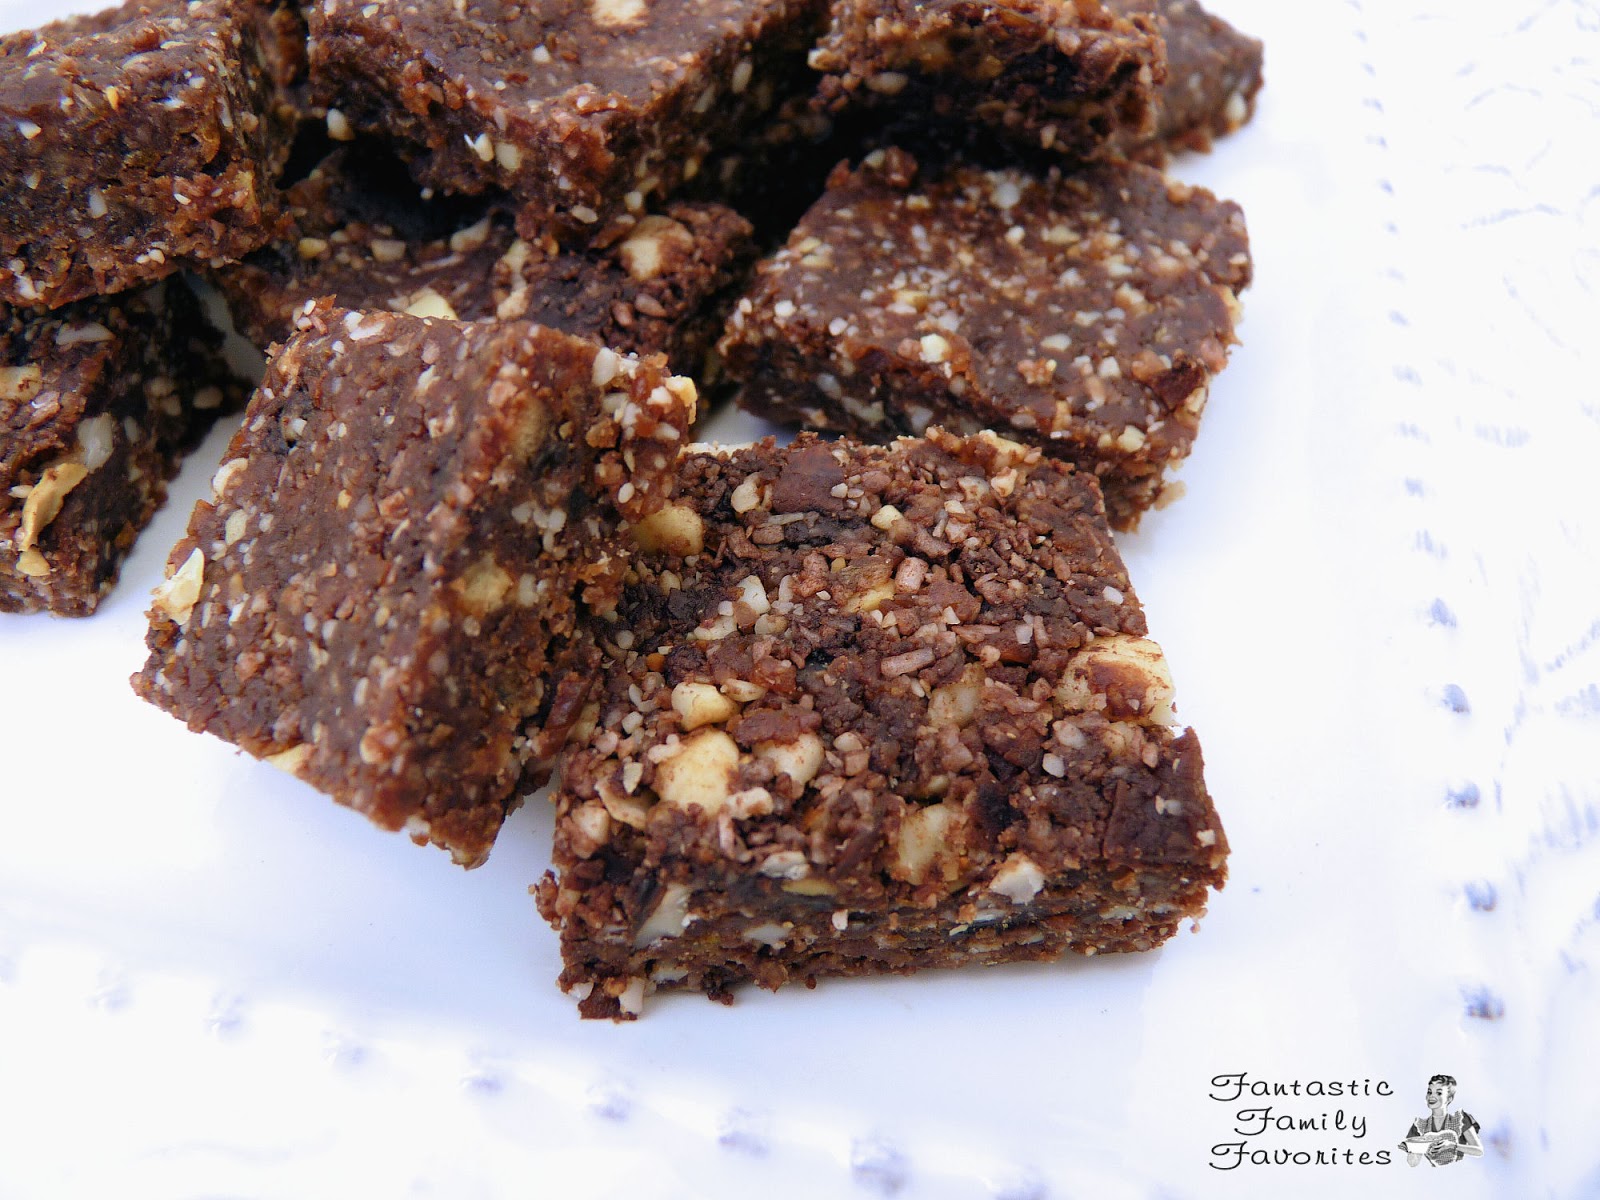 Fantastic Family Favorites: Date and Cashew Snack Bars